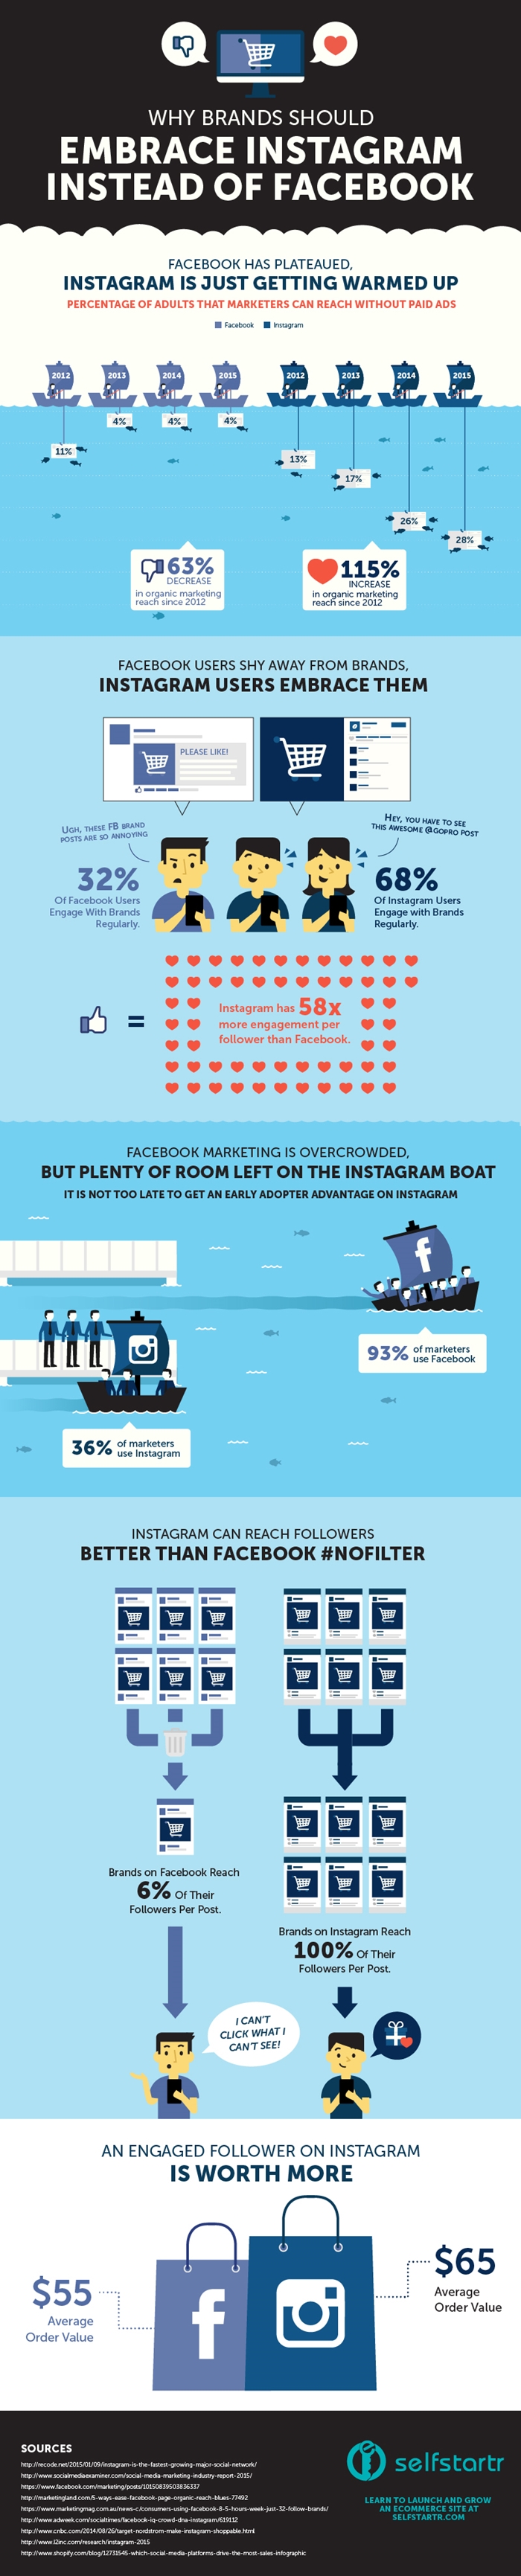 Why-Brands-Should-Embrace-Instagram-Instead-of-Facebook-INFOGRAPHIC-by-selfstartr-700